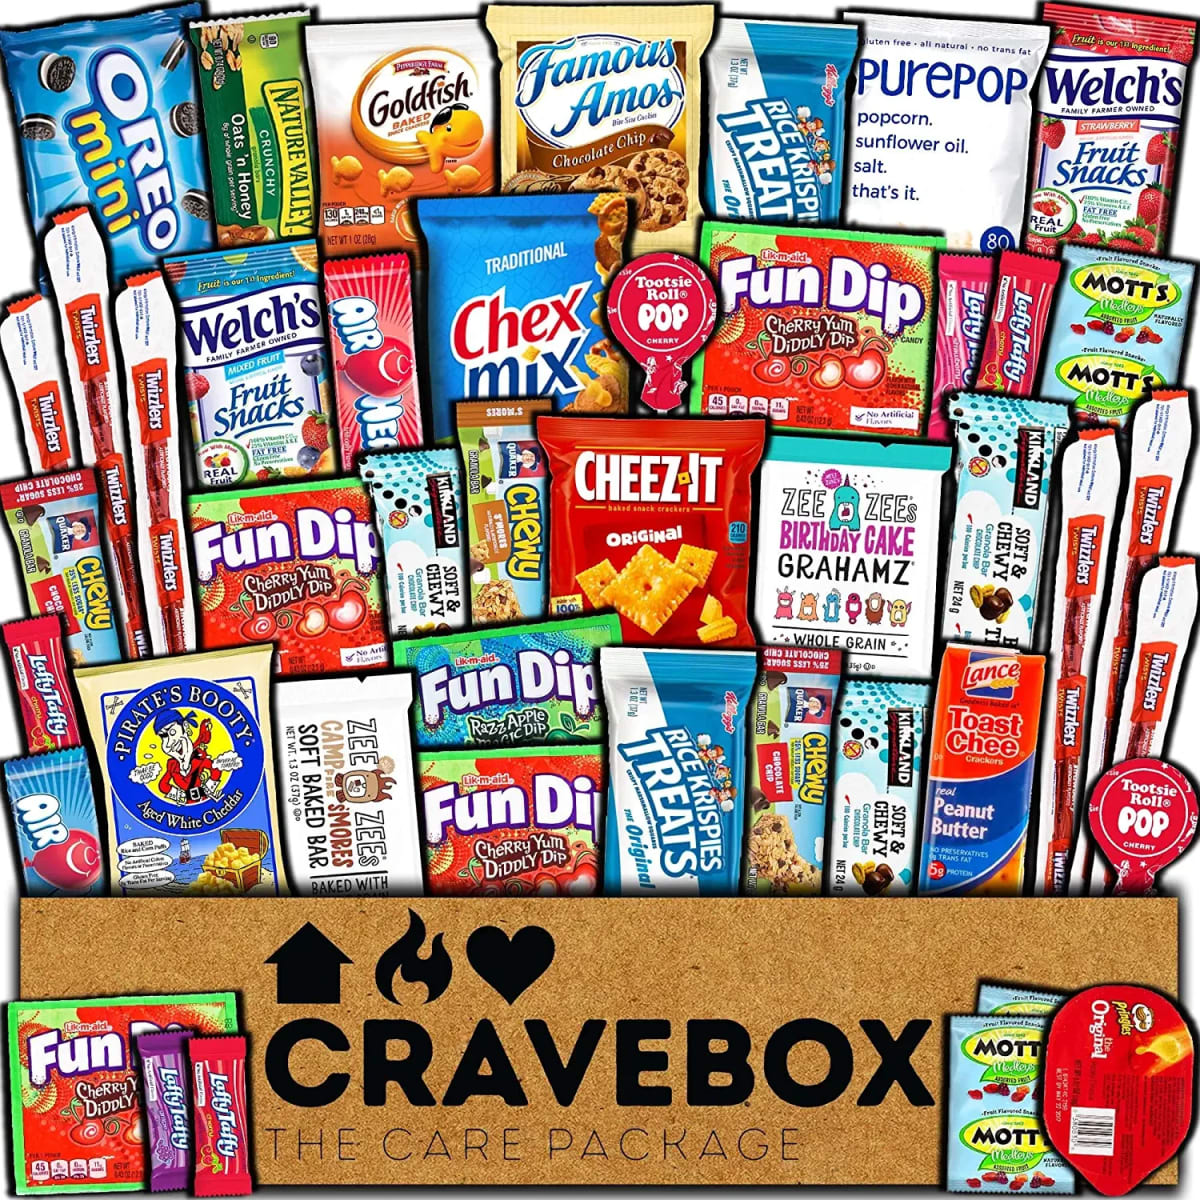 Snack Box Variety Pack Care Package (45 Count) Back to School Gift Basket Stuffers Kids Teens Grandchildren Men Women Adults Candy Food Cookies Chips Arrangement Mix College Student Sampler Office